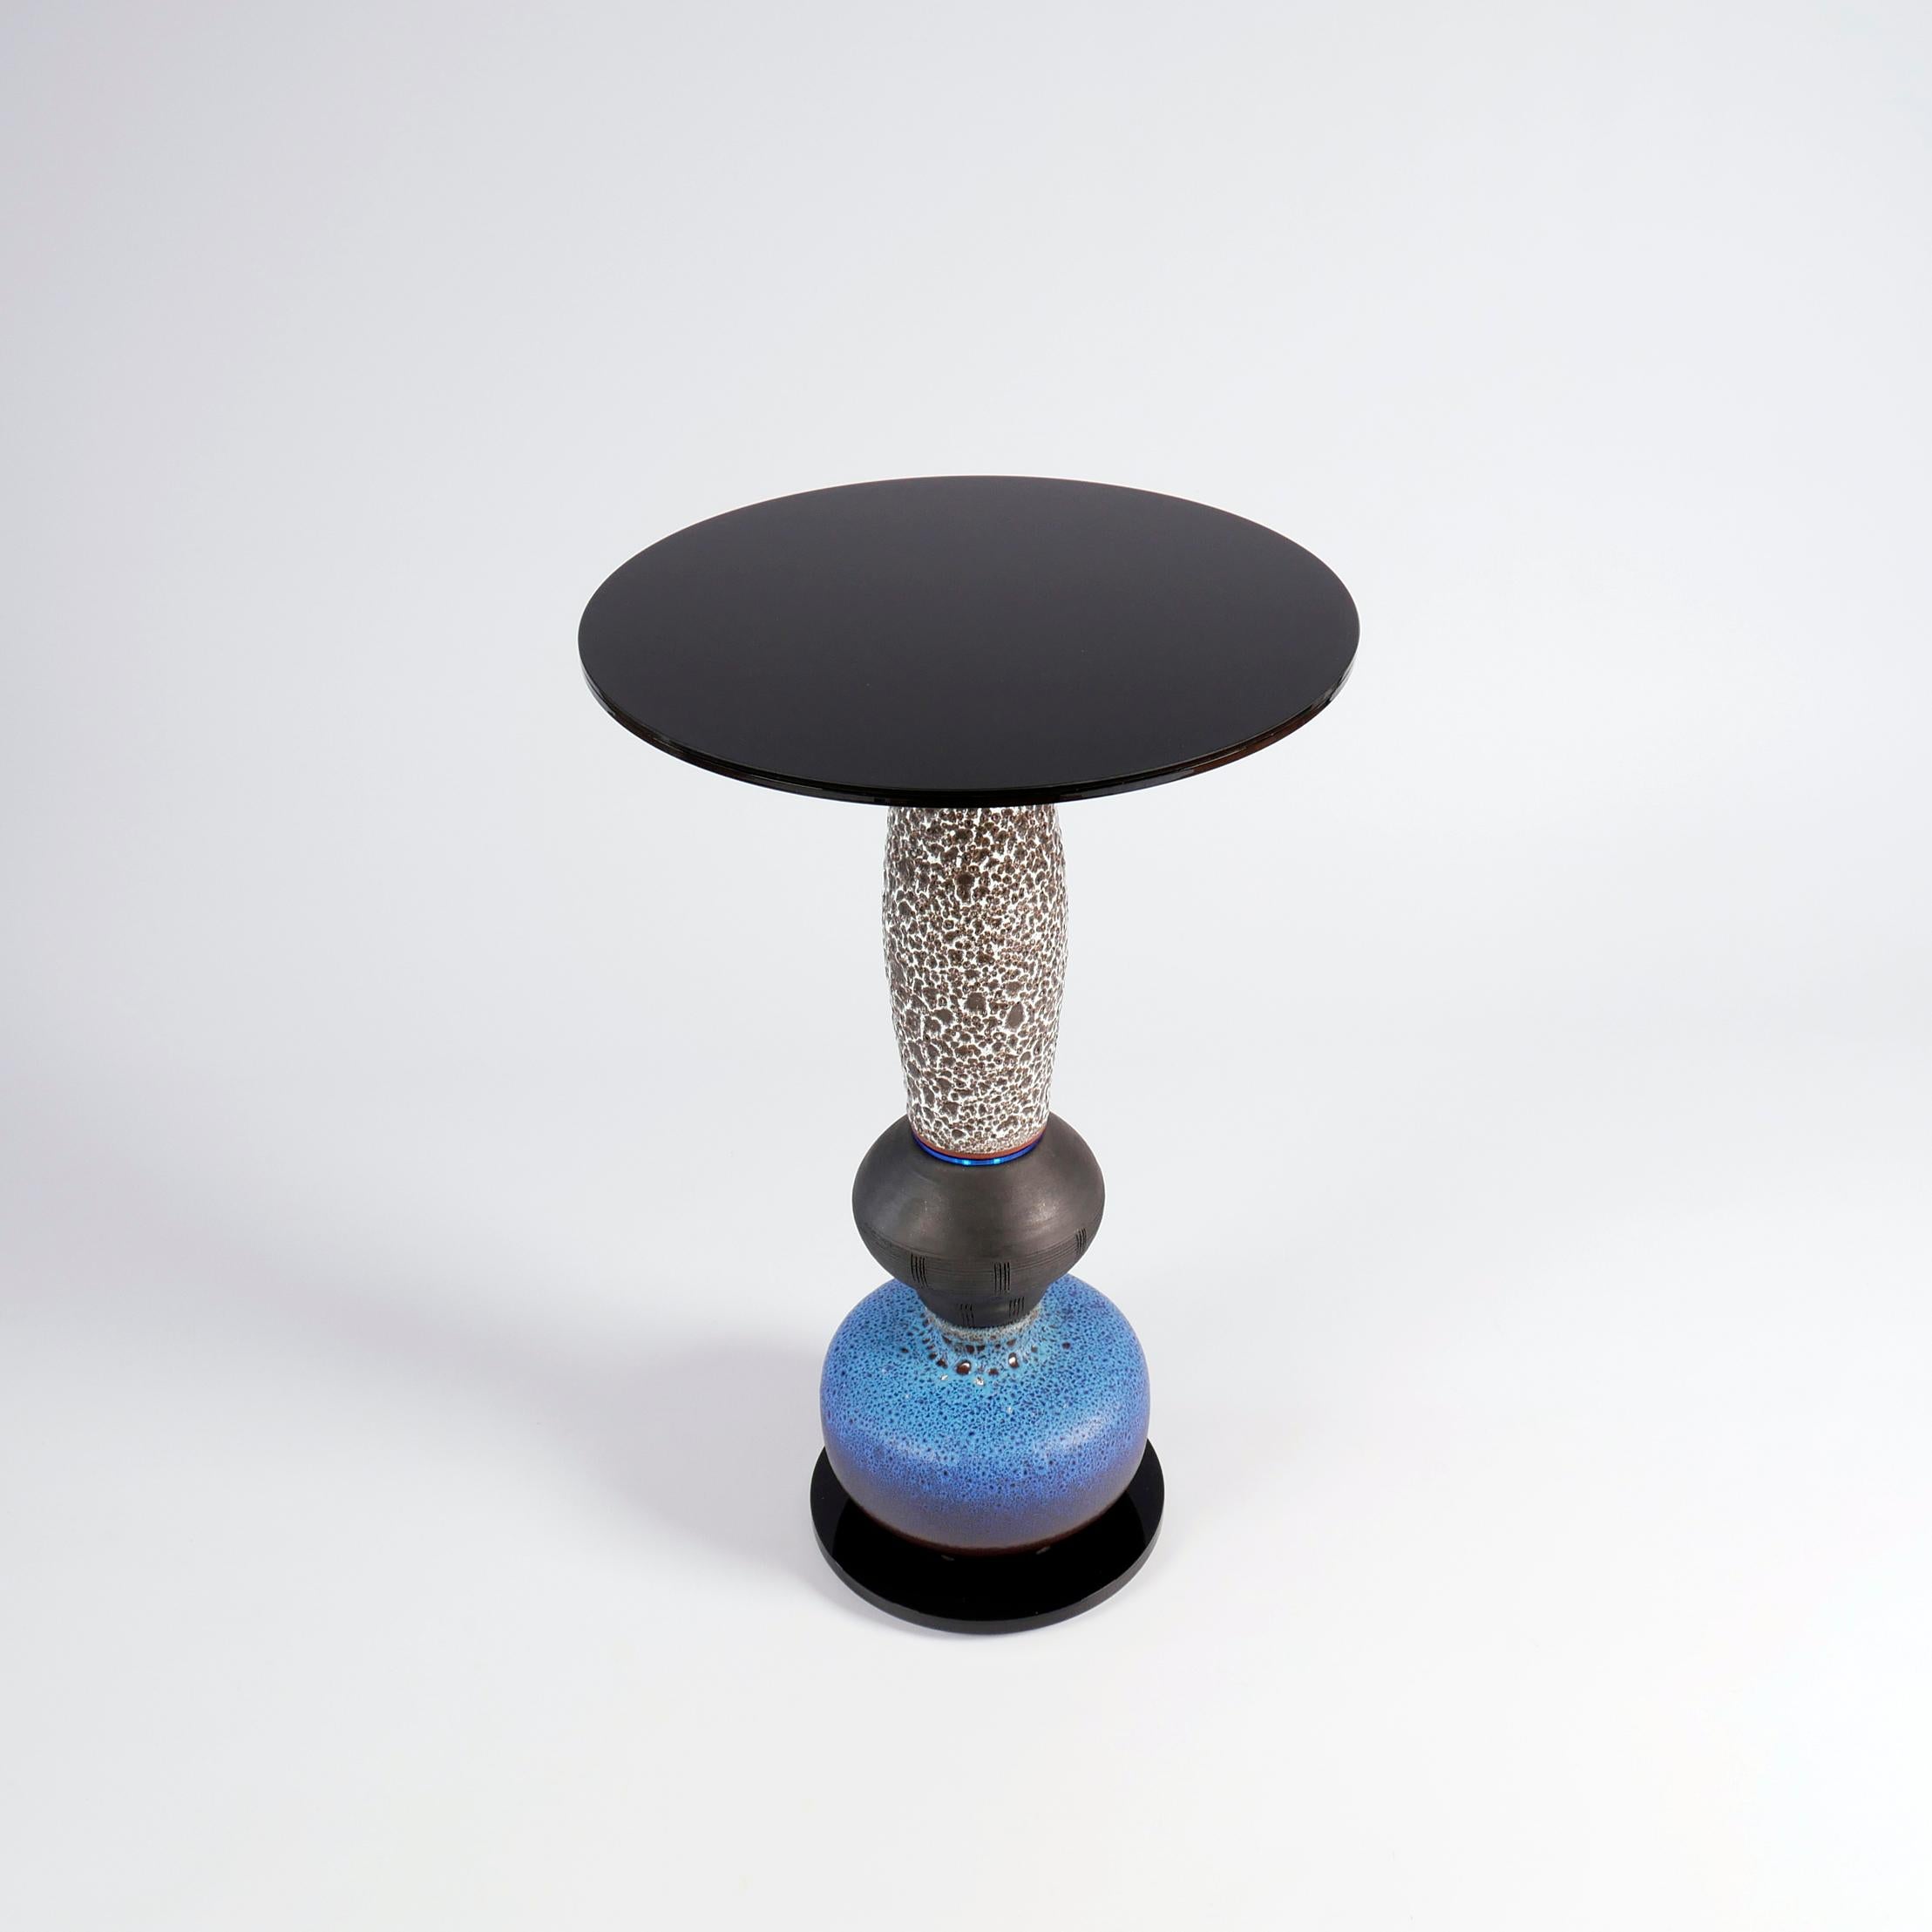 Mid-Century Modern 'The Angels Have Gone' Side Table, Vintage Ceramics and Glass, One Off Piece